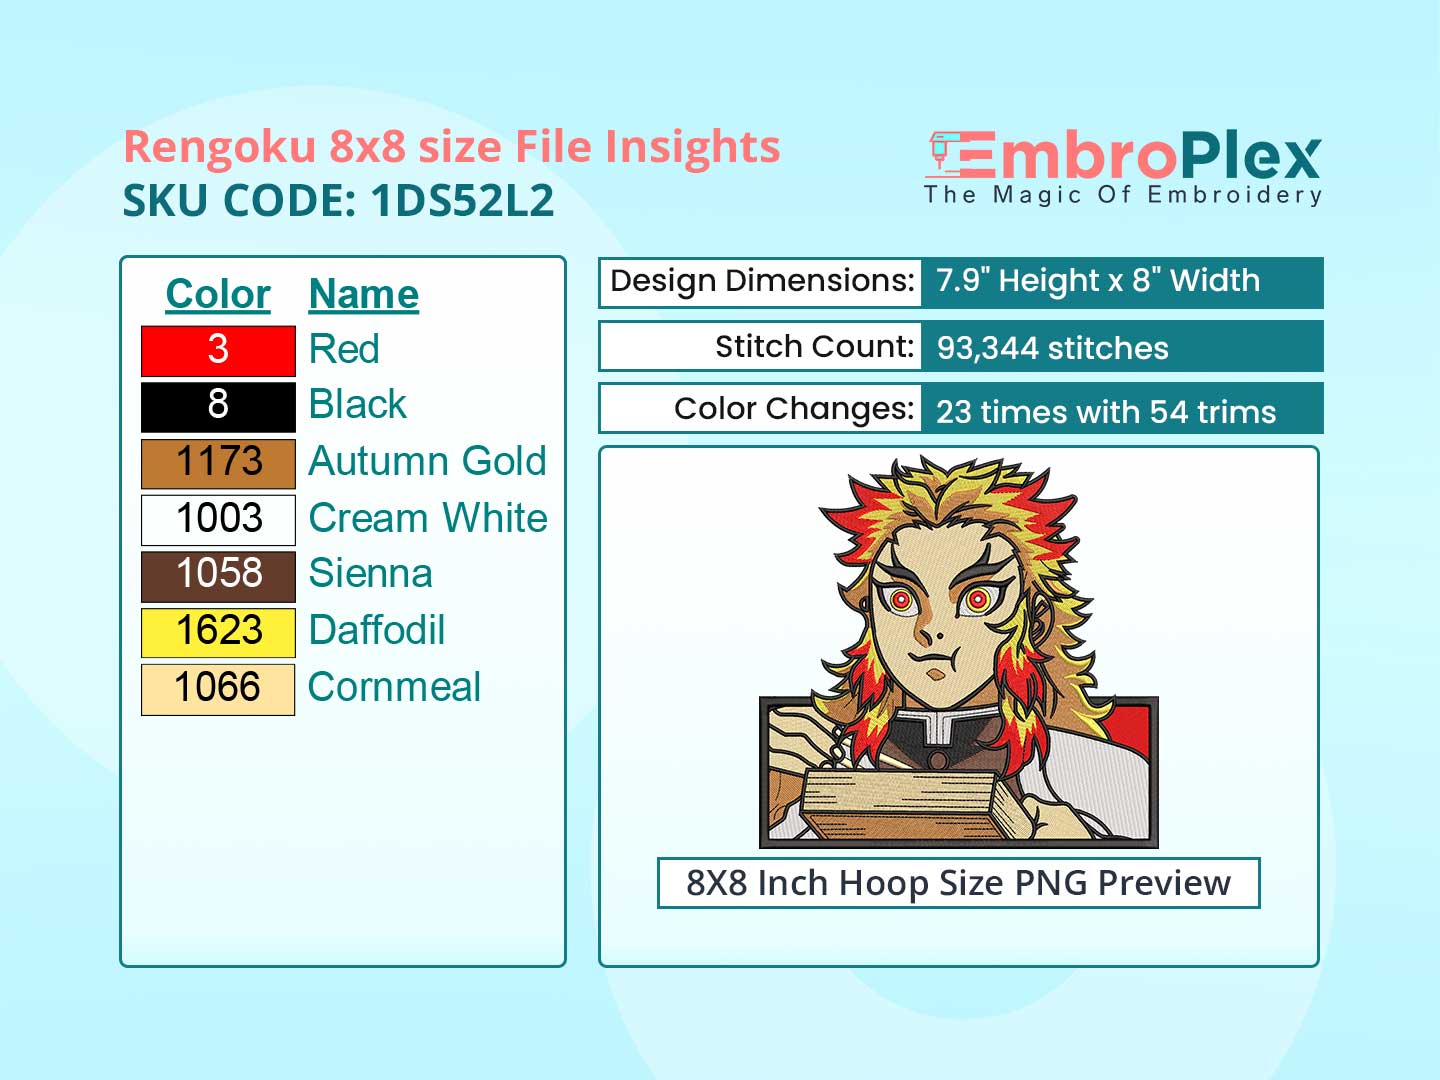 Anime-Inspired Rengoku Embroidery Design File - 8x8 Inch hoop Size Variation overview image